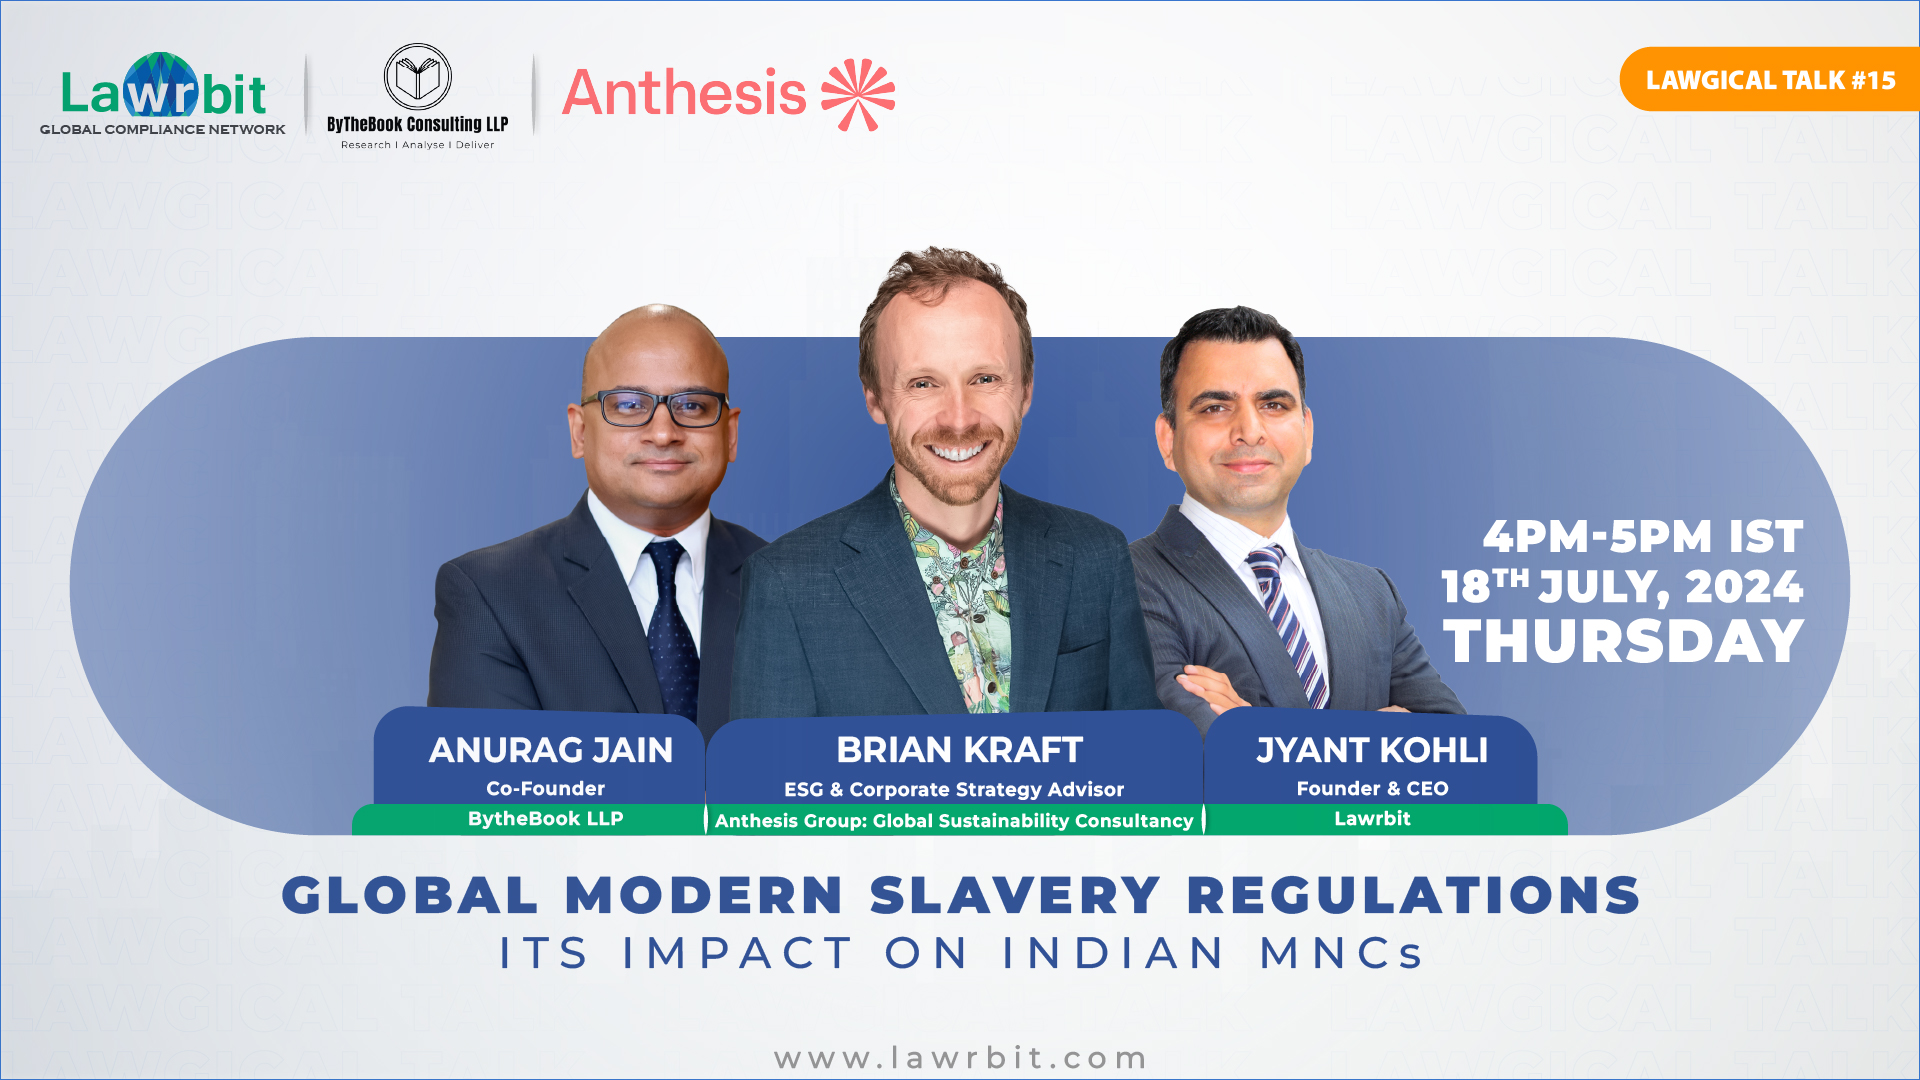 Global Modern Slavery Regulations & its impact on Indian MNCs